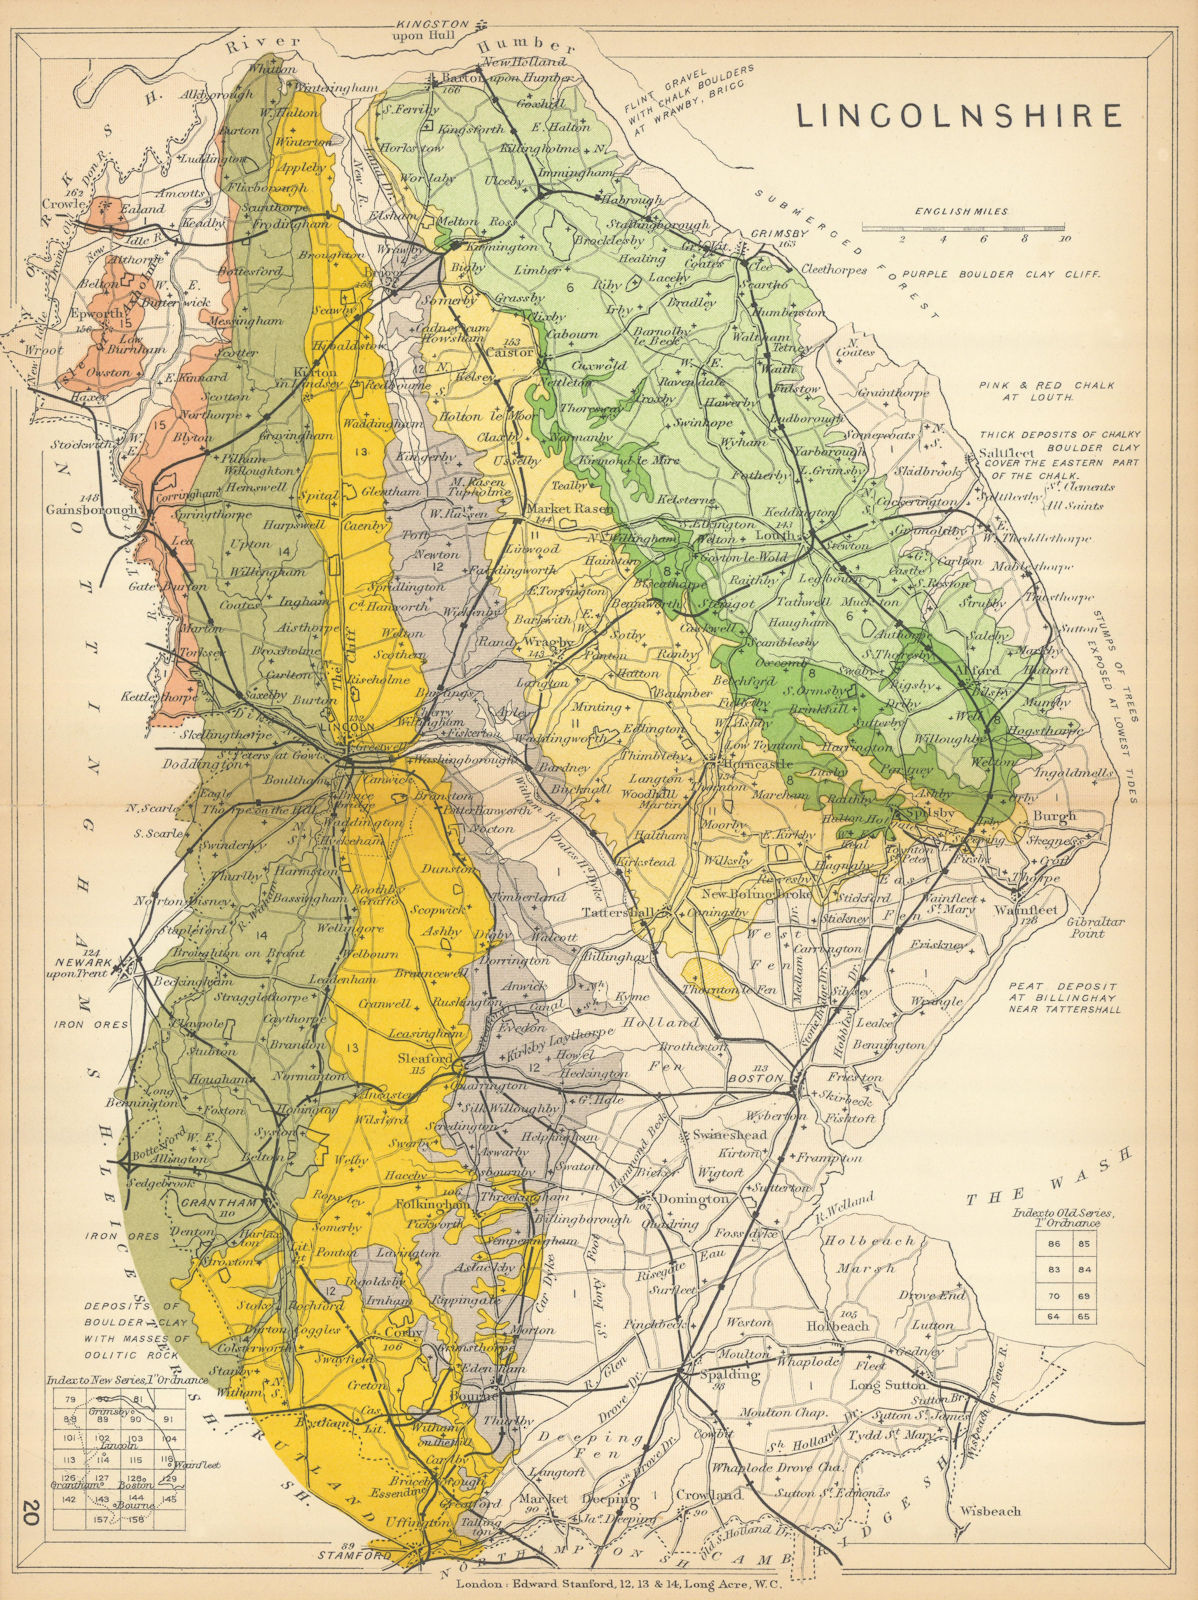 Associate Product LINCOLNSHIRE Geological map. STANFORD 1904 old antique vintage plan chart